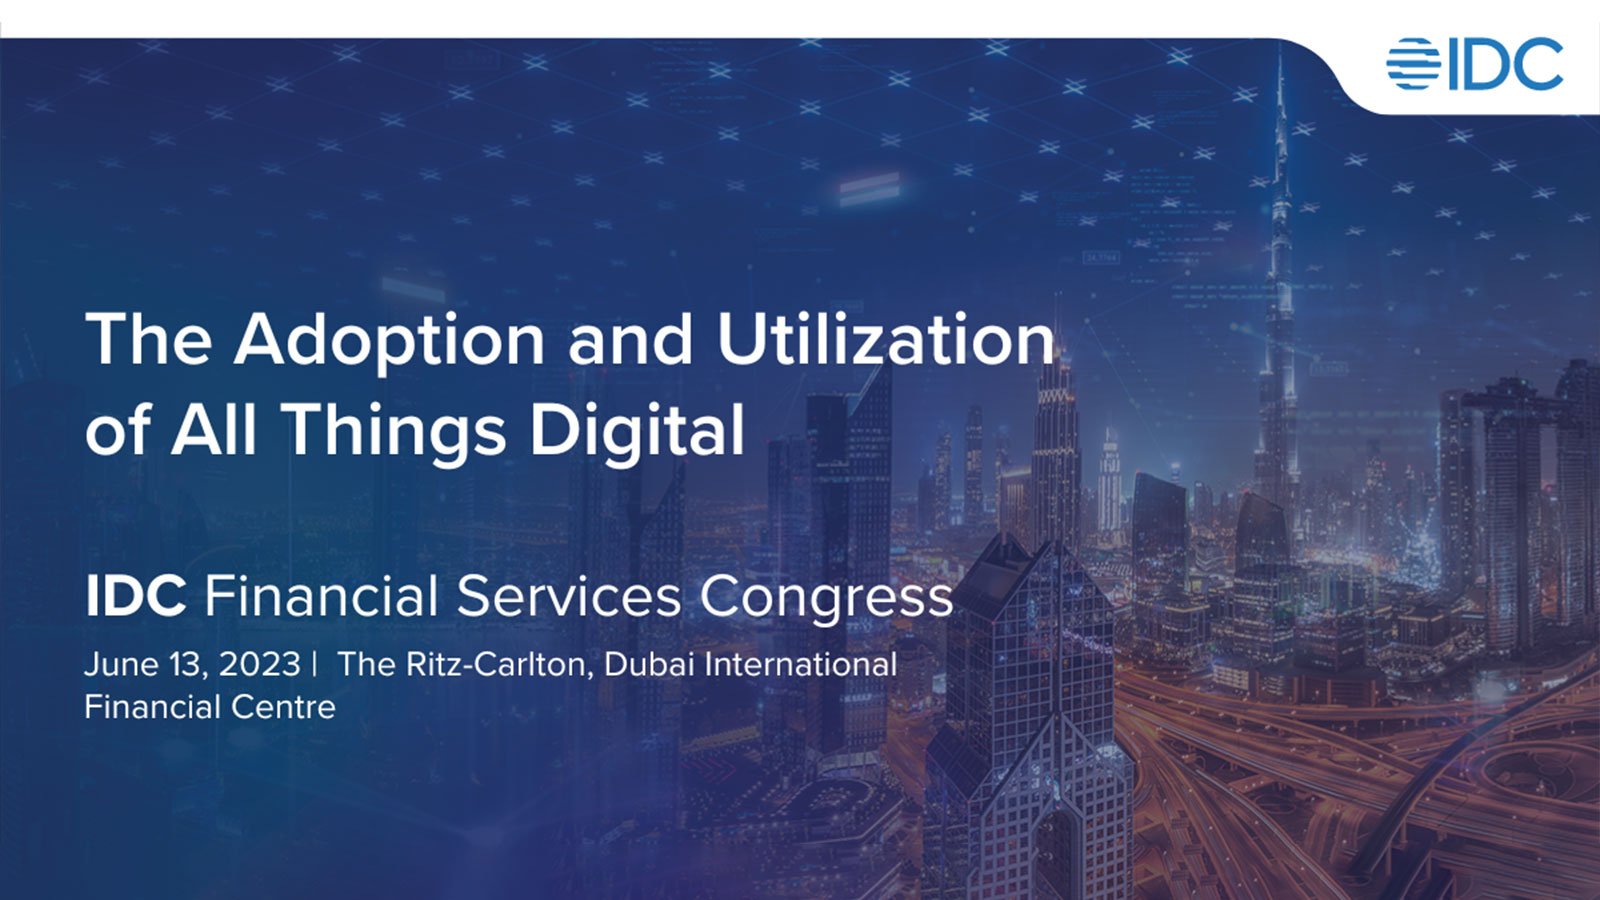 IDC Financial Services Congress 2023 to Highlight the Latest Digital Transformation Trends Shaping the Middle East's BFSI Industry